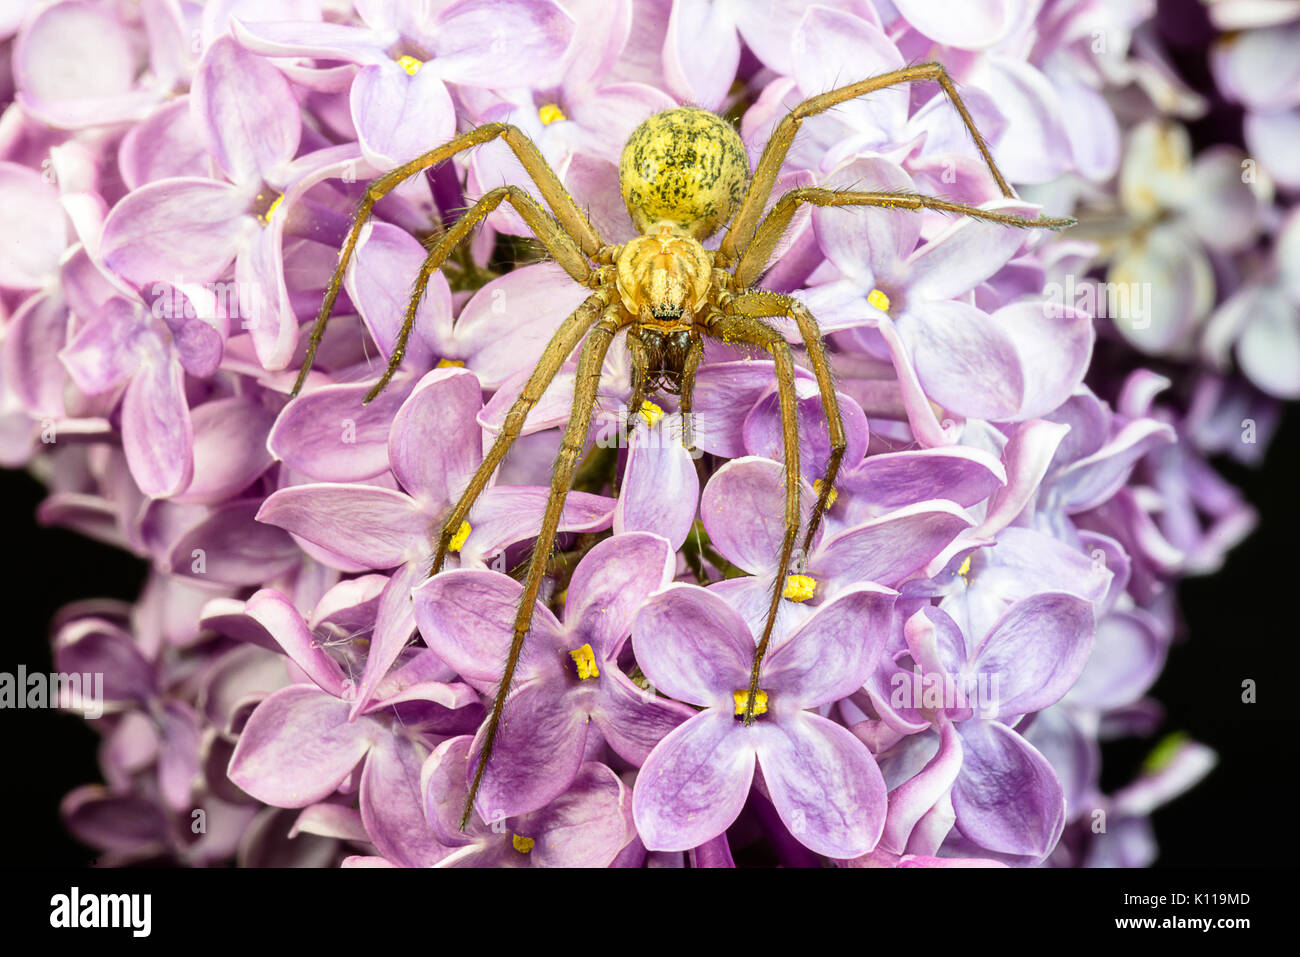 Closeup of a giant big fat spider on a common lilac flower Stock Photo